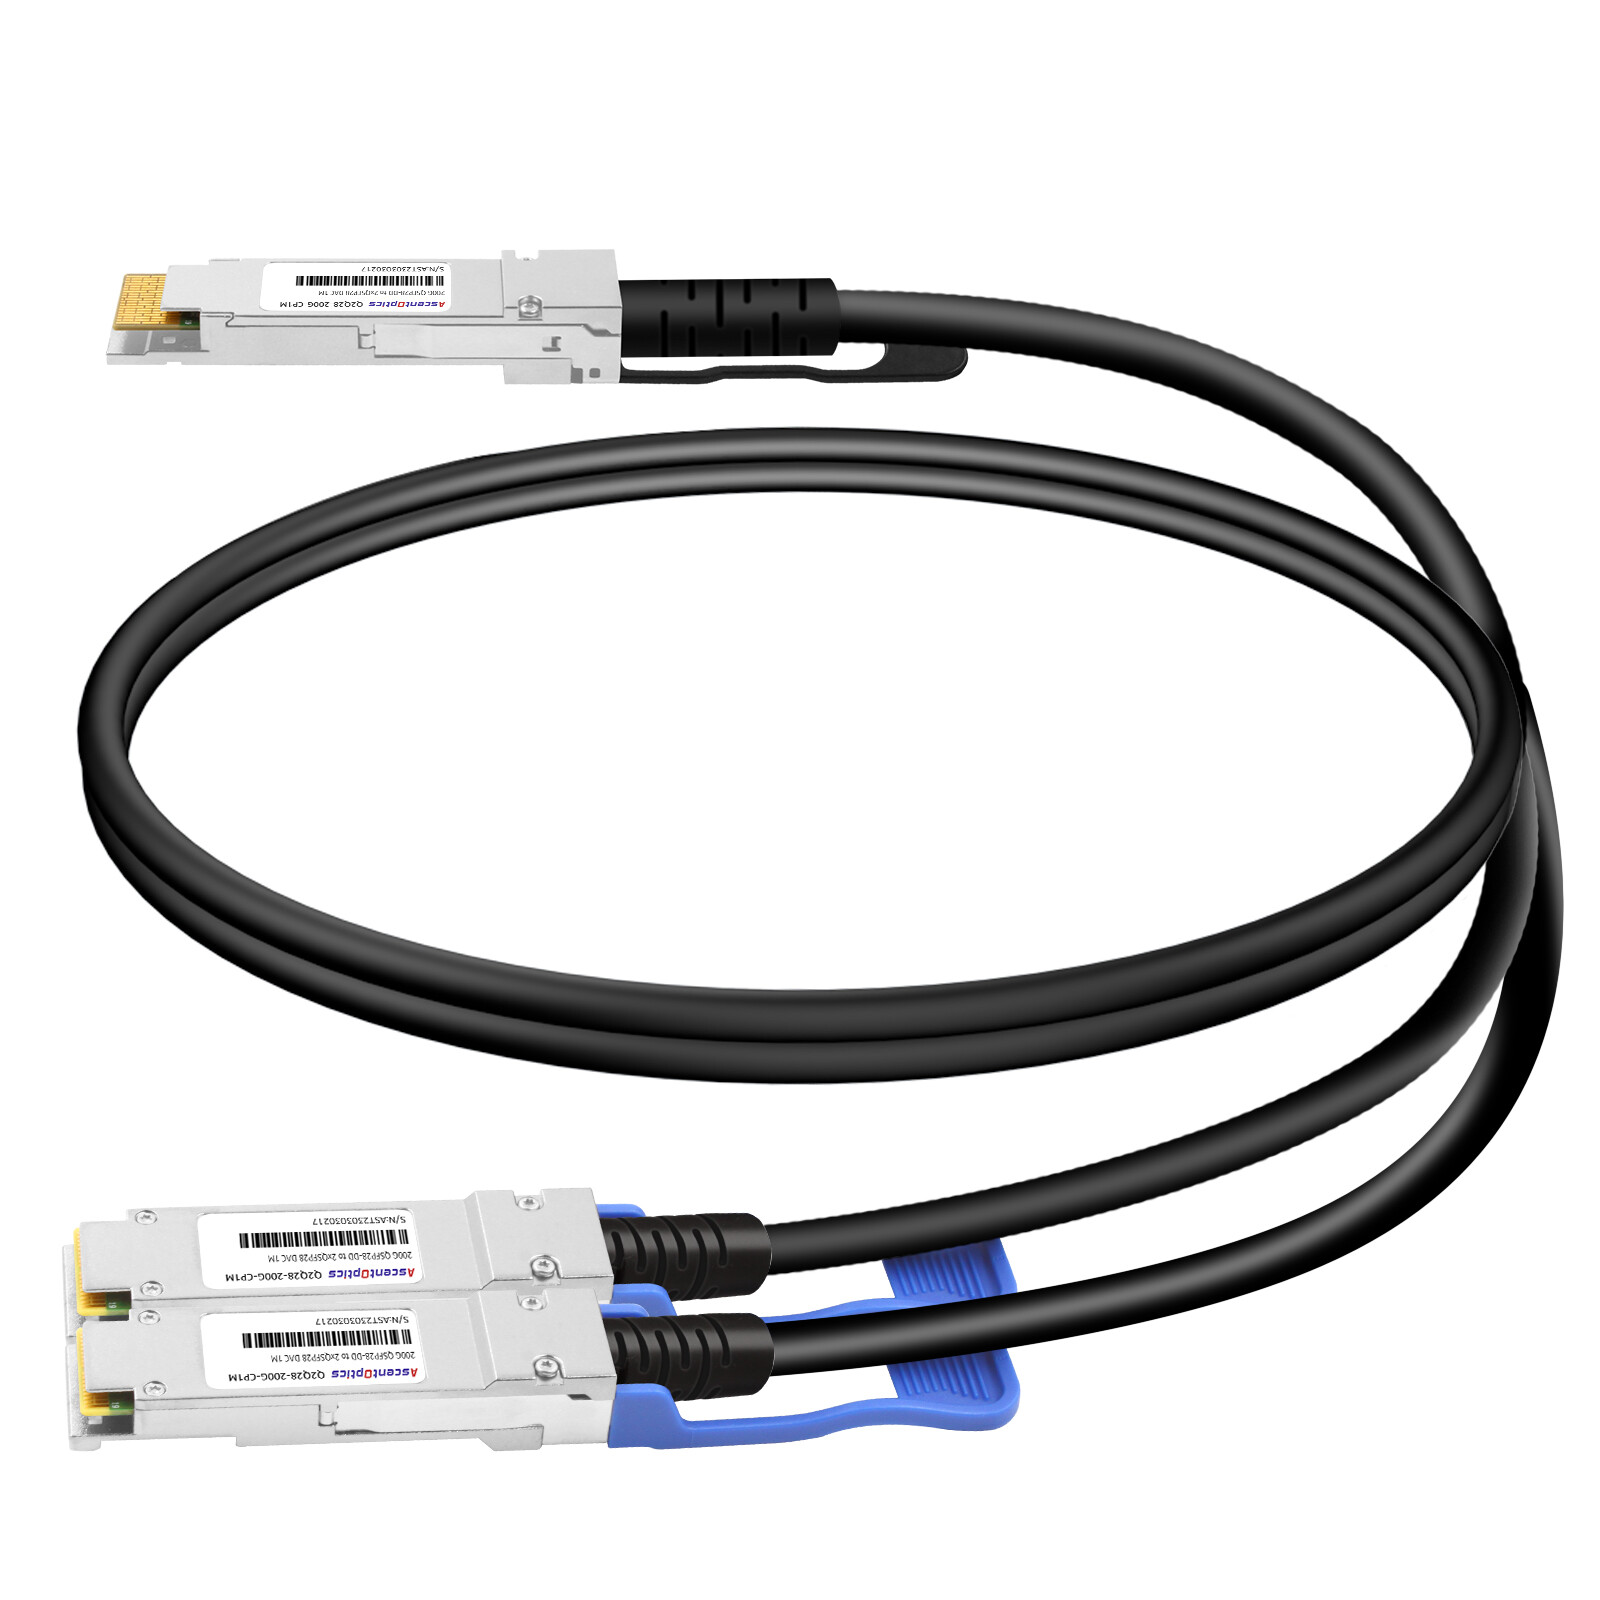 200G QSFP28-DD to 2x 100G QSFP28 Copper Breakout Cable,1 Meter,Passive